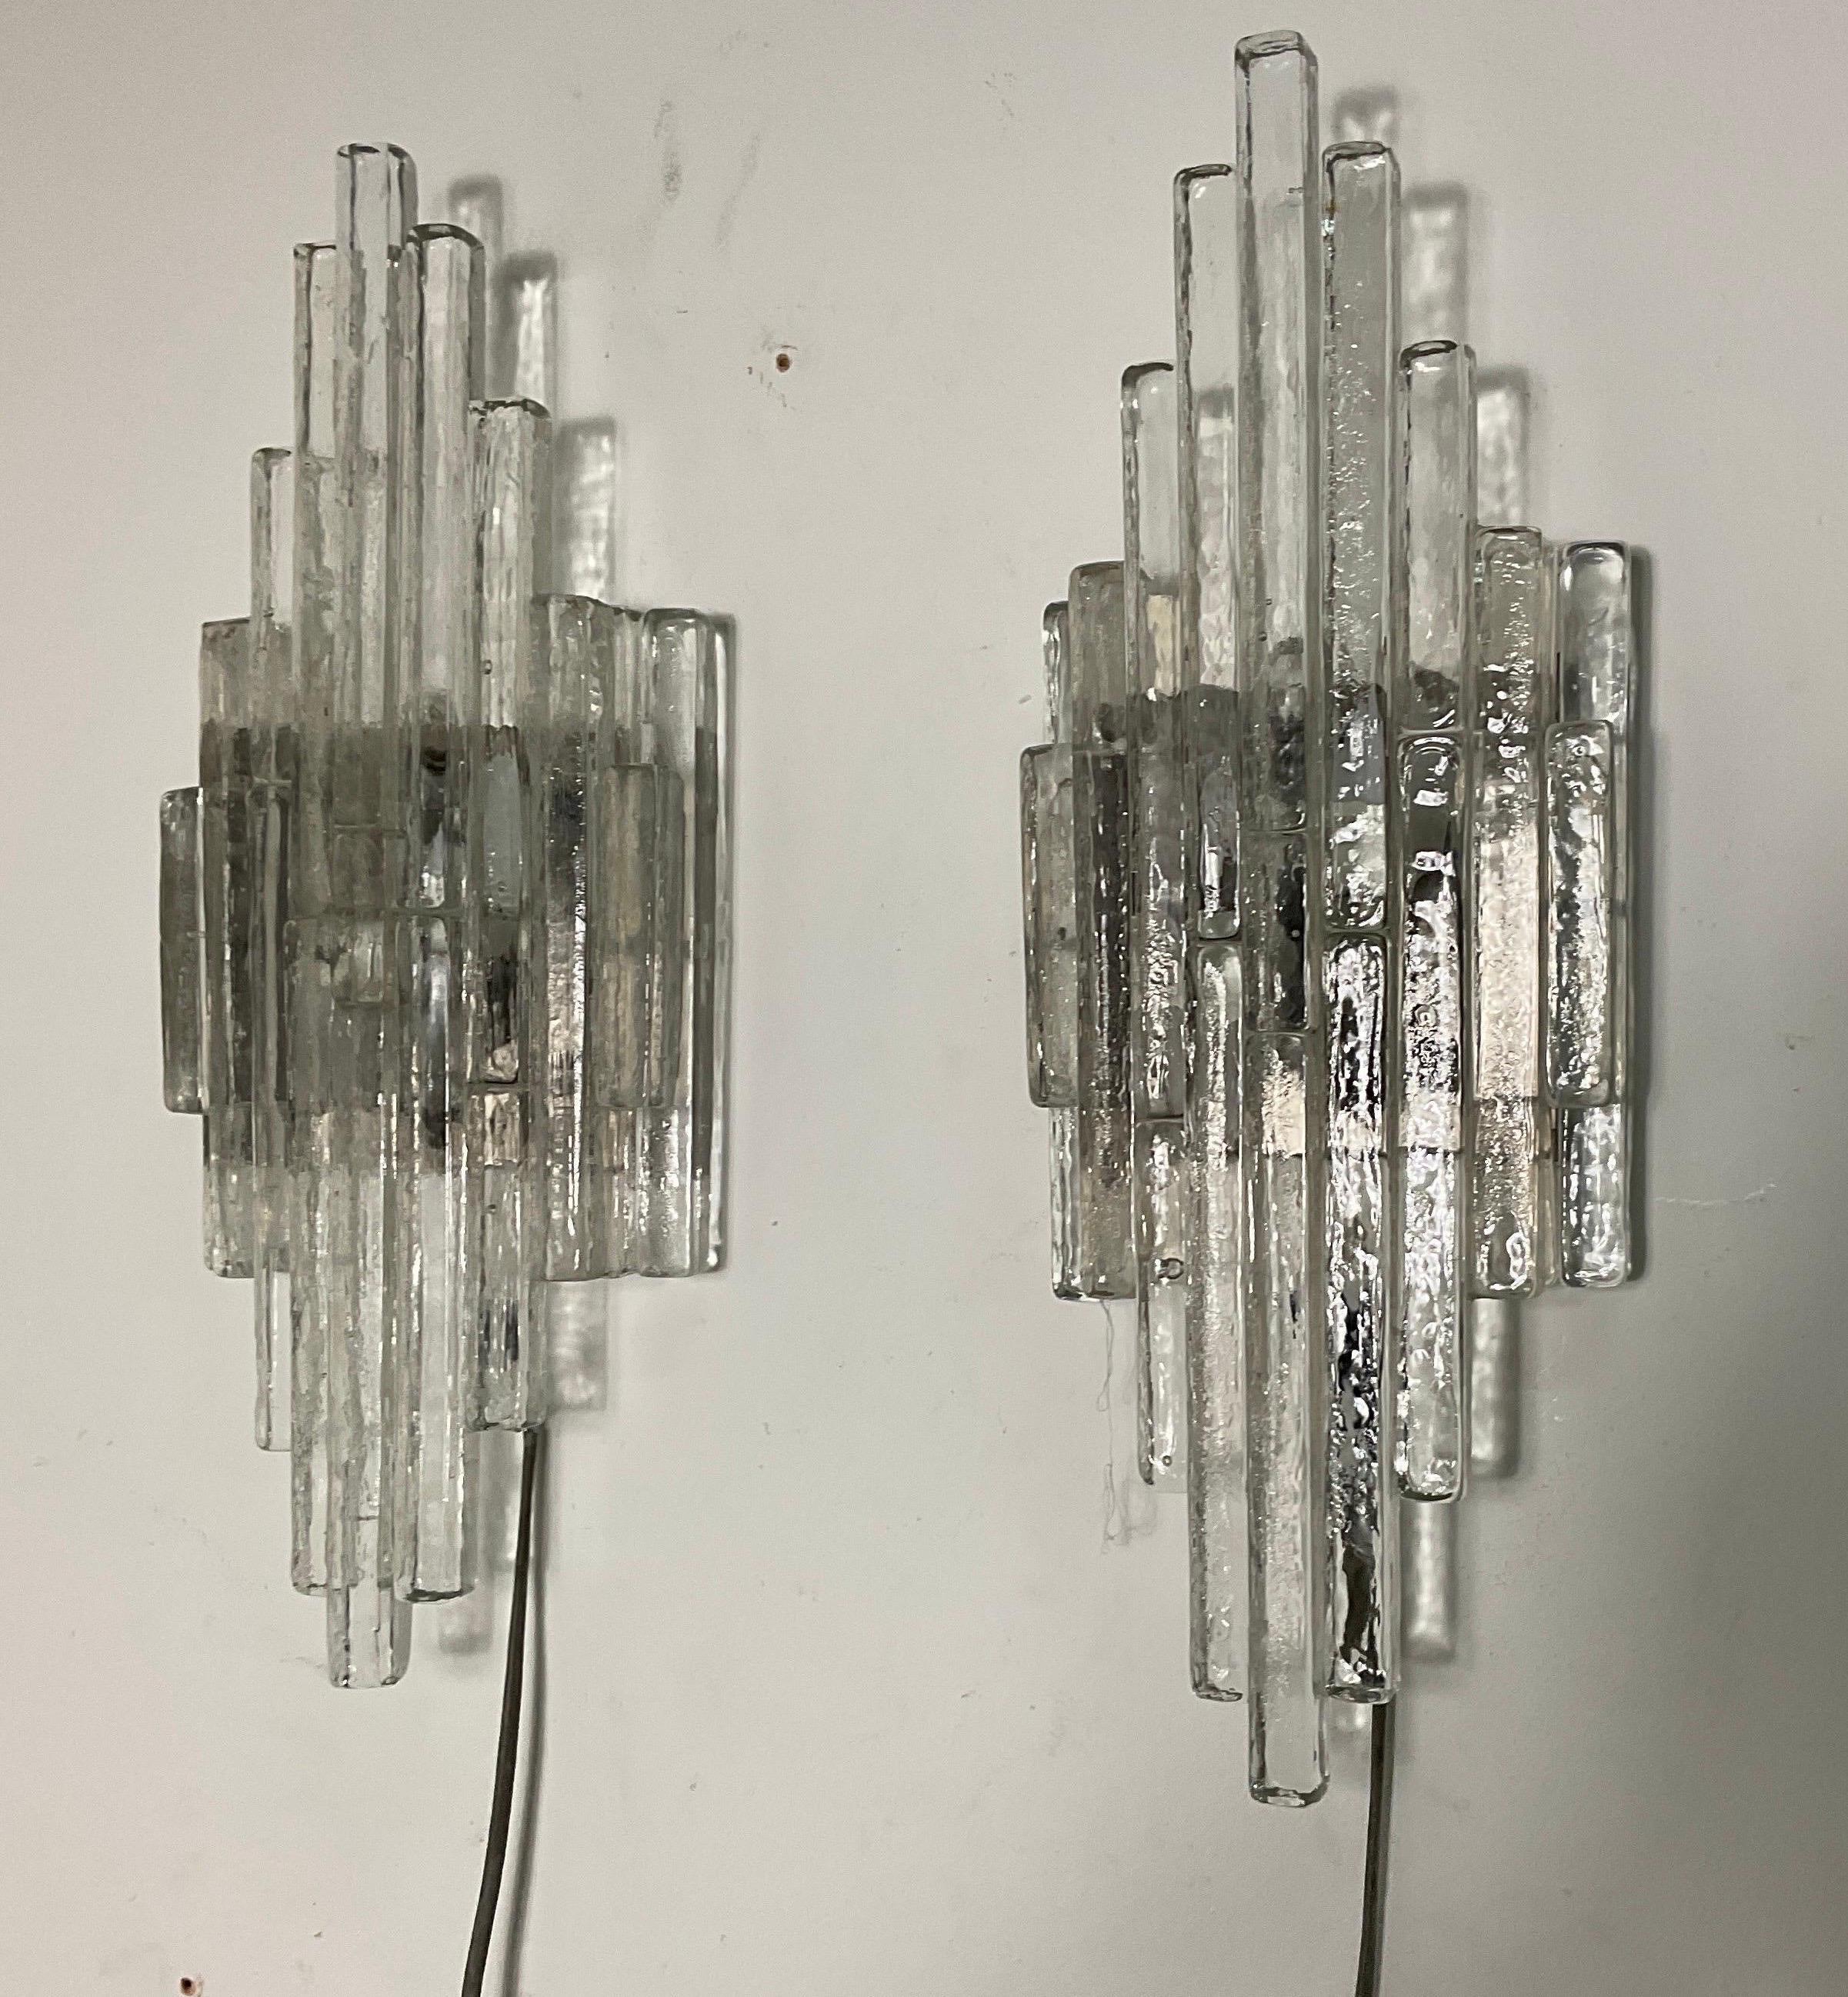 'Linea' series wall lamps, Poliarte Production, Verona, '70s. For Sale 5